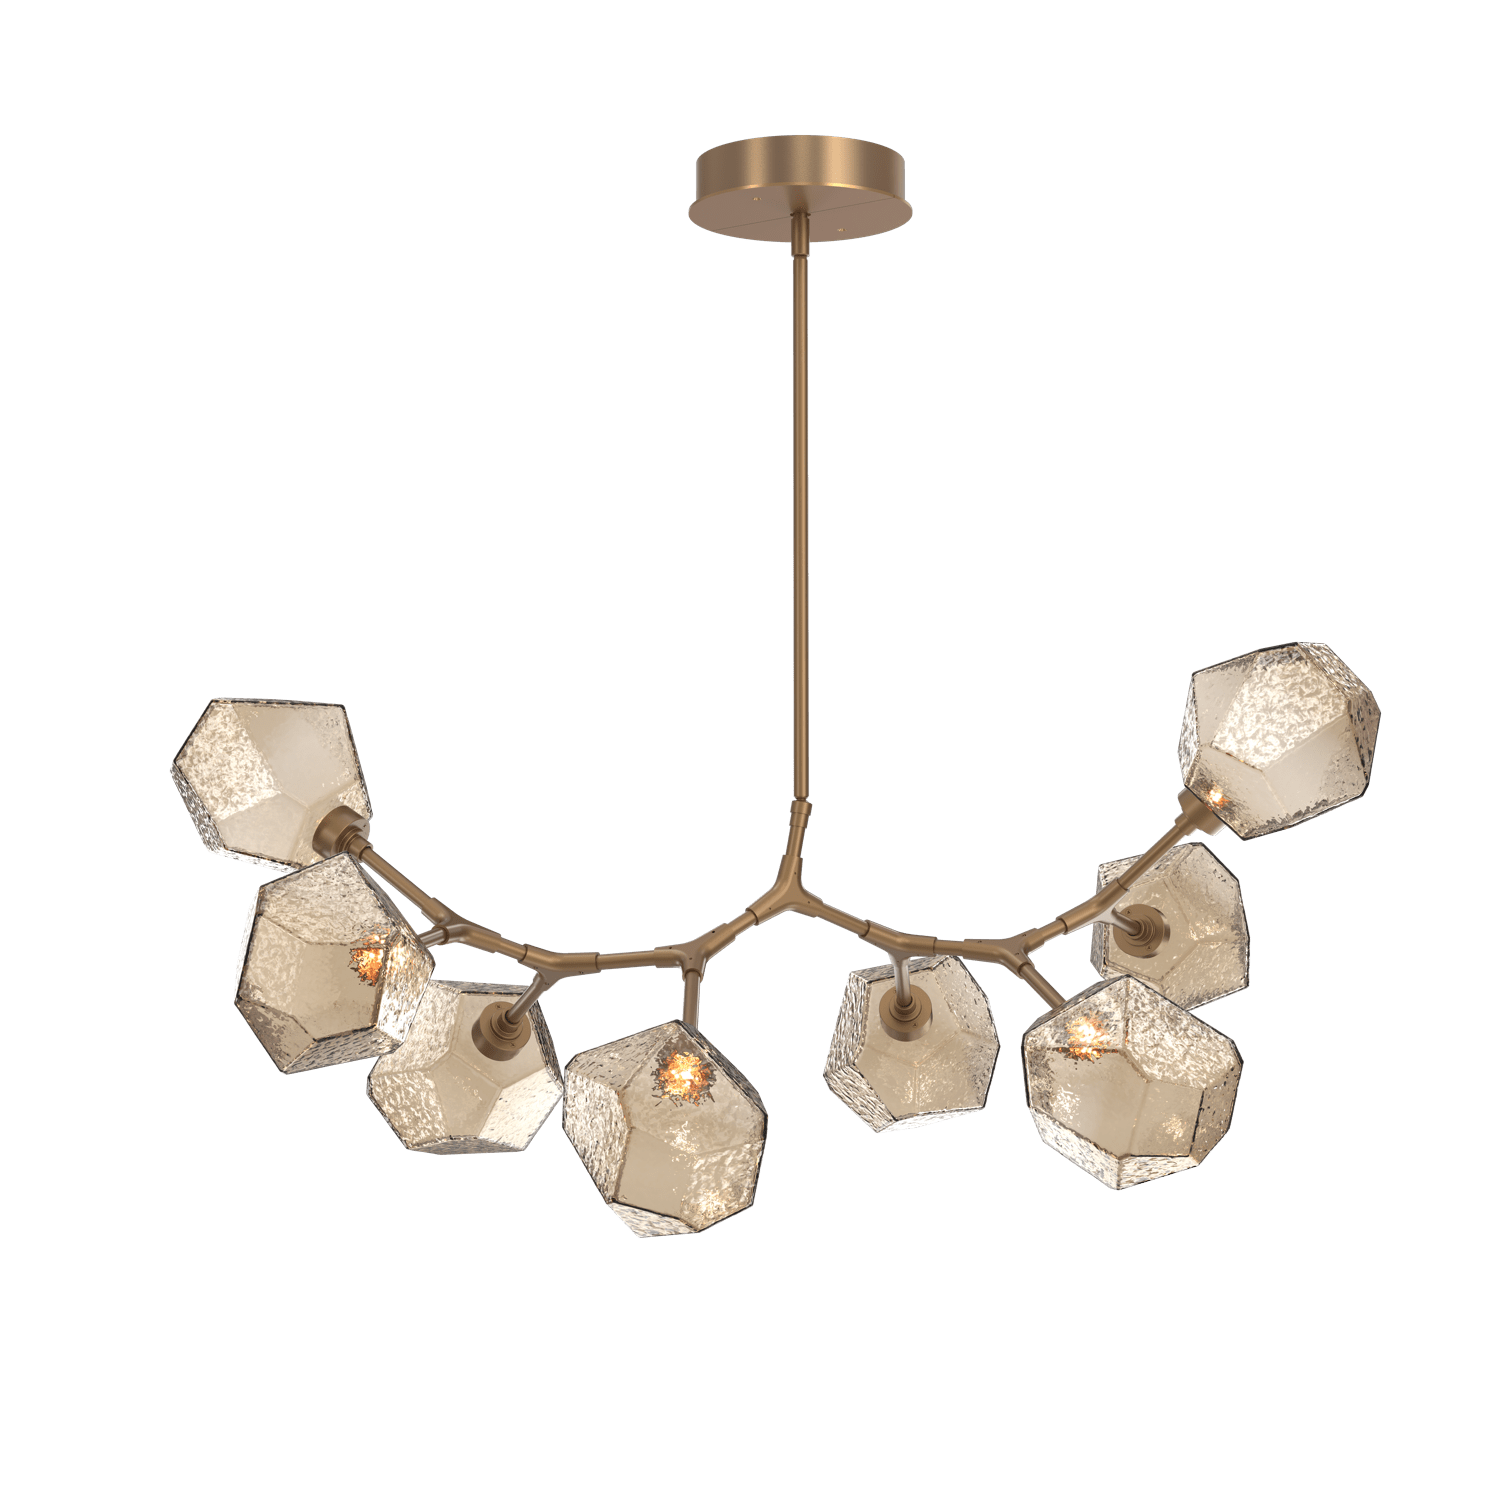 PLB0039-BB-NB-B-Hammerton-Studio-Gem-8-light-modern-branch-chandelier-with-novel-brass-finish-and-bronze-blown-glass-shades-and-LED-lamping